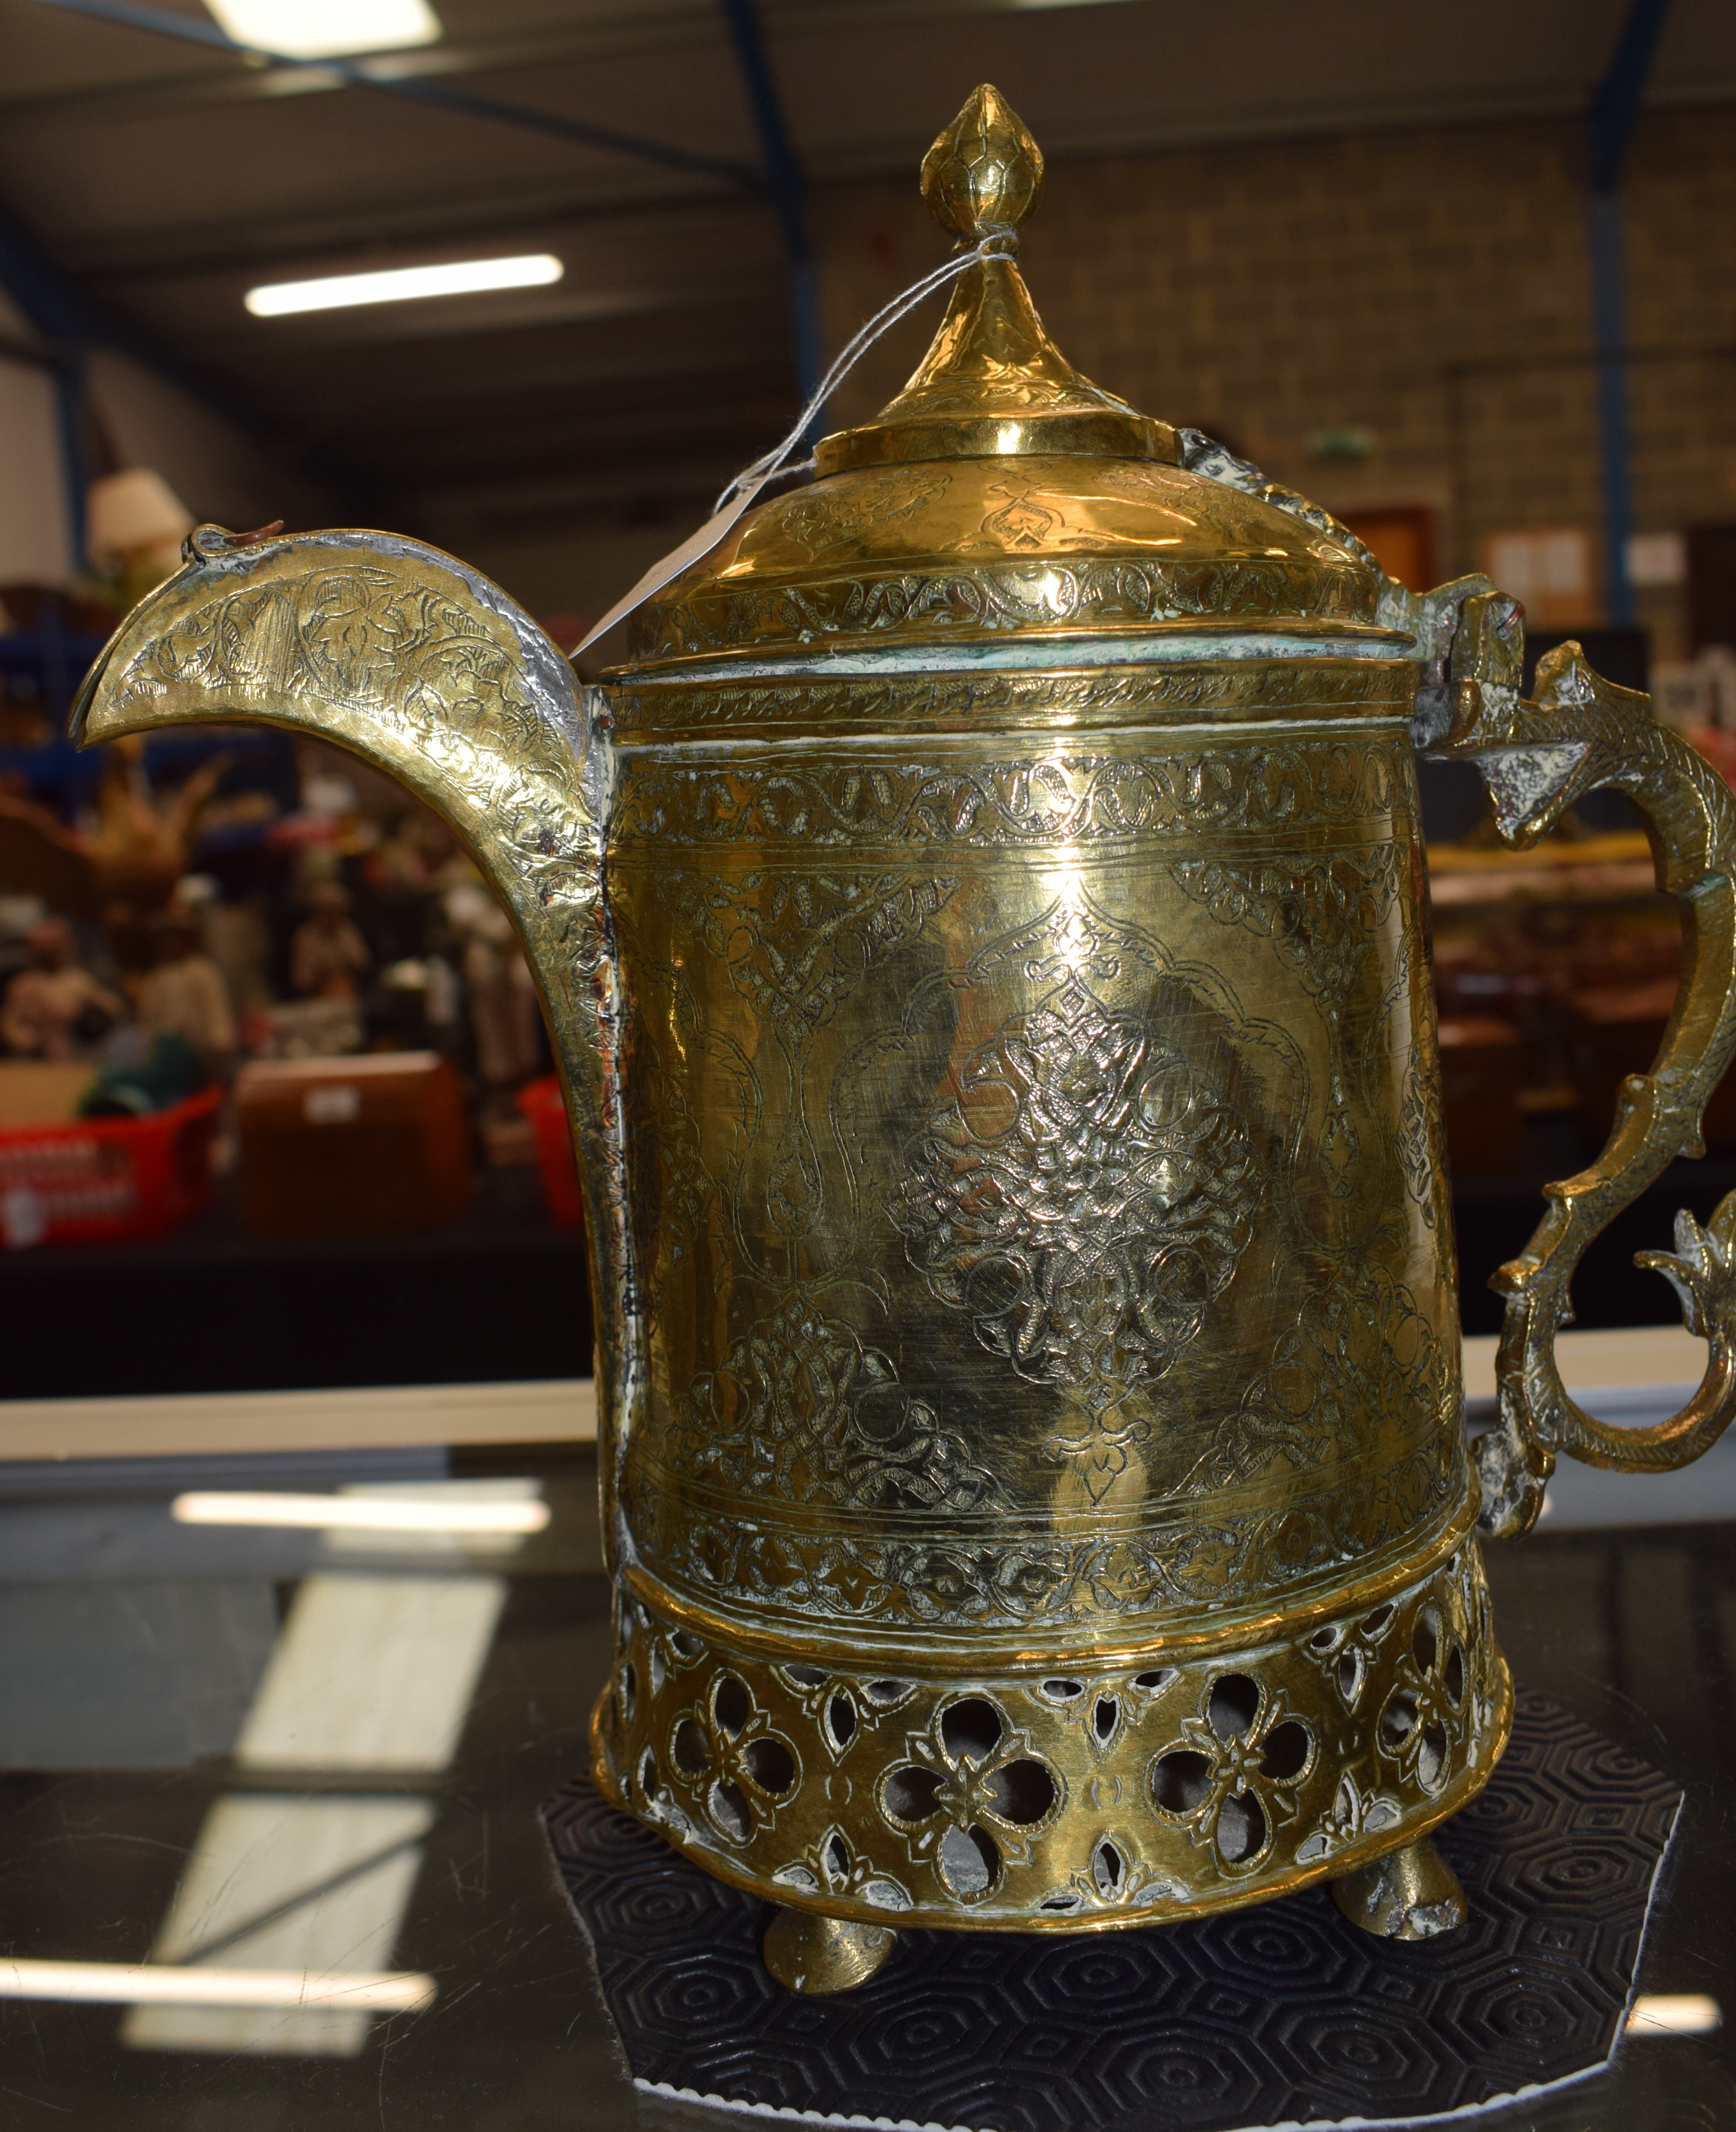 A LARGE 19TH CENTURY MIDDLE EASTERN BRASS KUFIC EWER decorated with foliage and vines. 30 cm x 22 c - Image 10 of 12